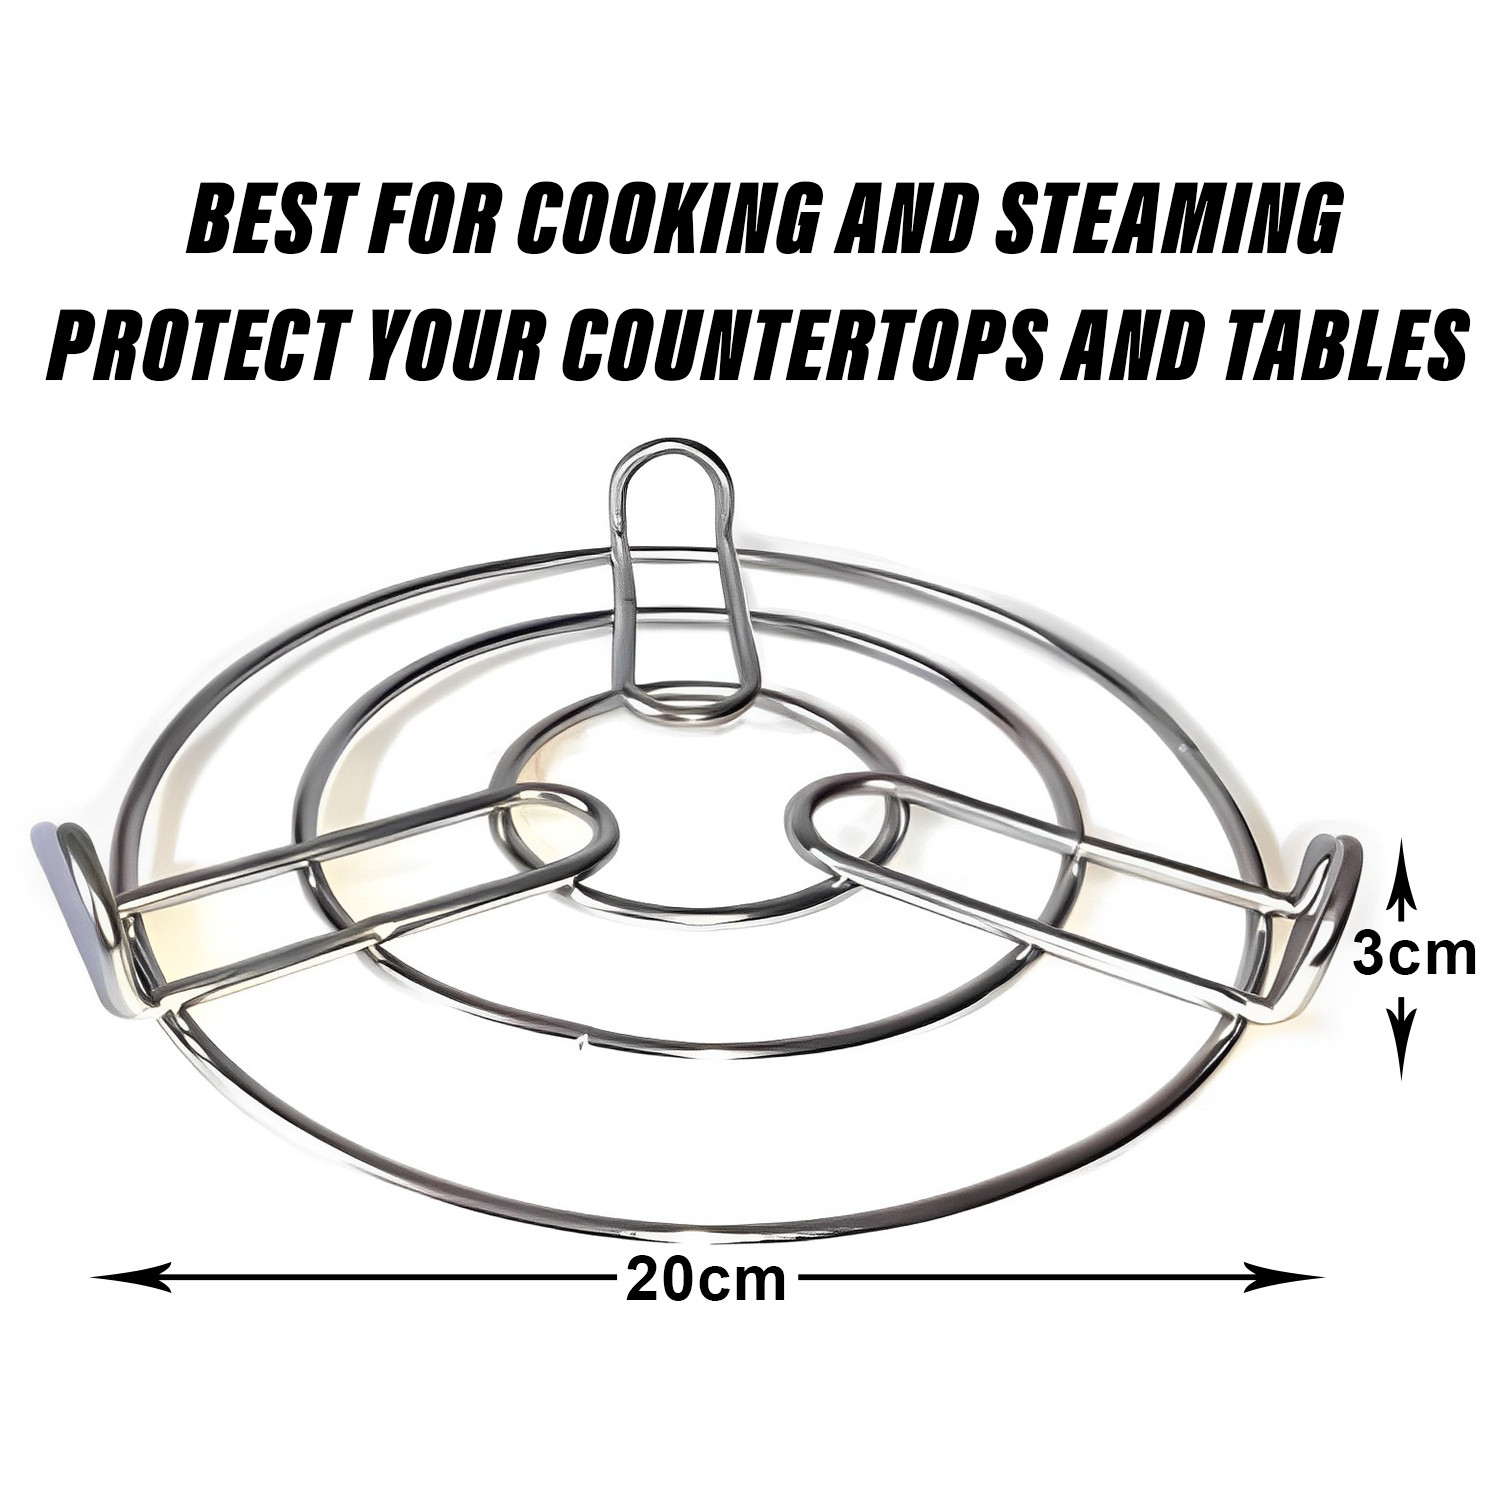 Kuber Industries Iron Stand | Stainless Steel Trivet |Round Steamer Rack for Kitchen | Heat Resistant Hot Plate Dishes Holder | Cooker Donga Stand | Silver